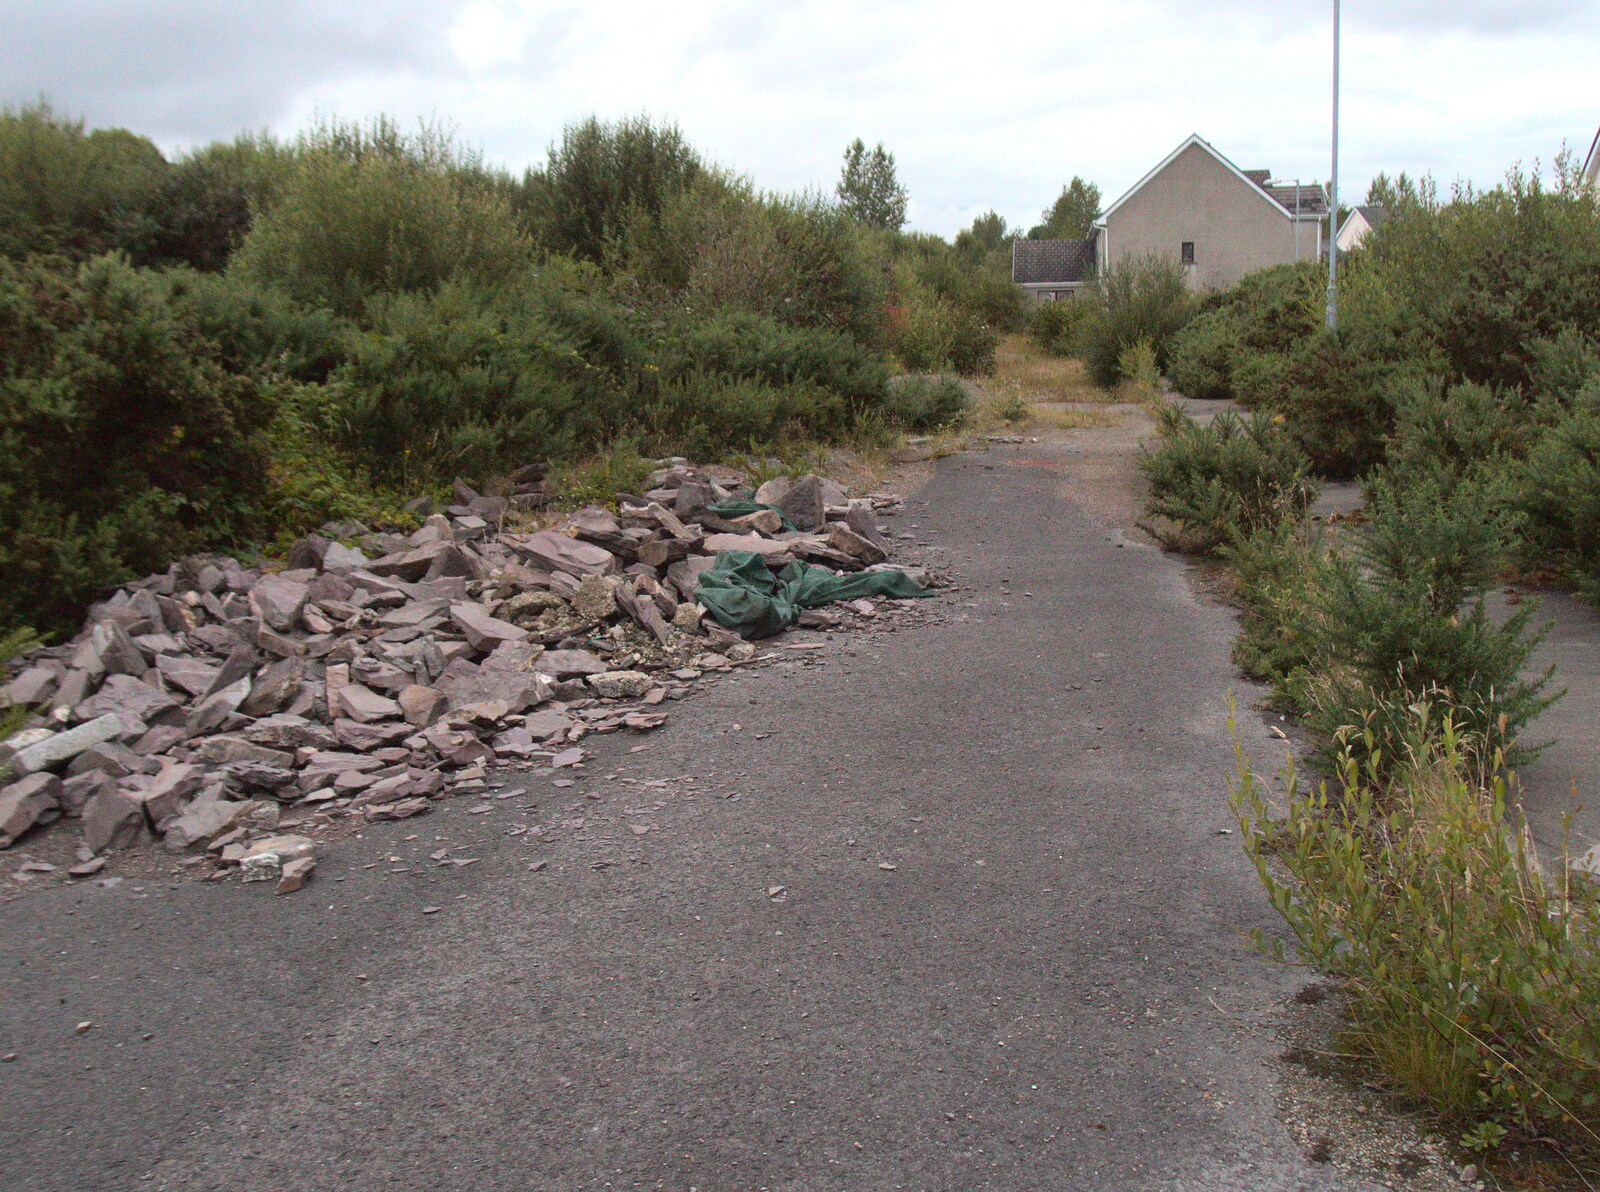 There's a big pile of rubble on the street from Baile an Sceilg to An tSnaidhme, Co. Kerry, Ireland - 31st July 2017